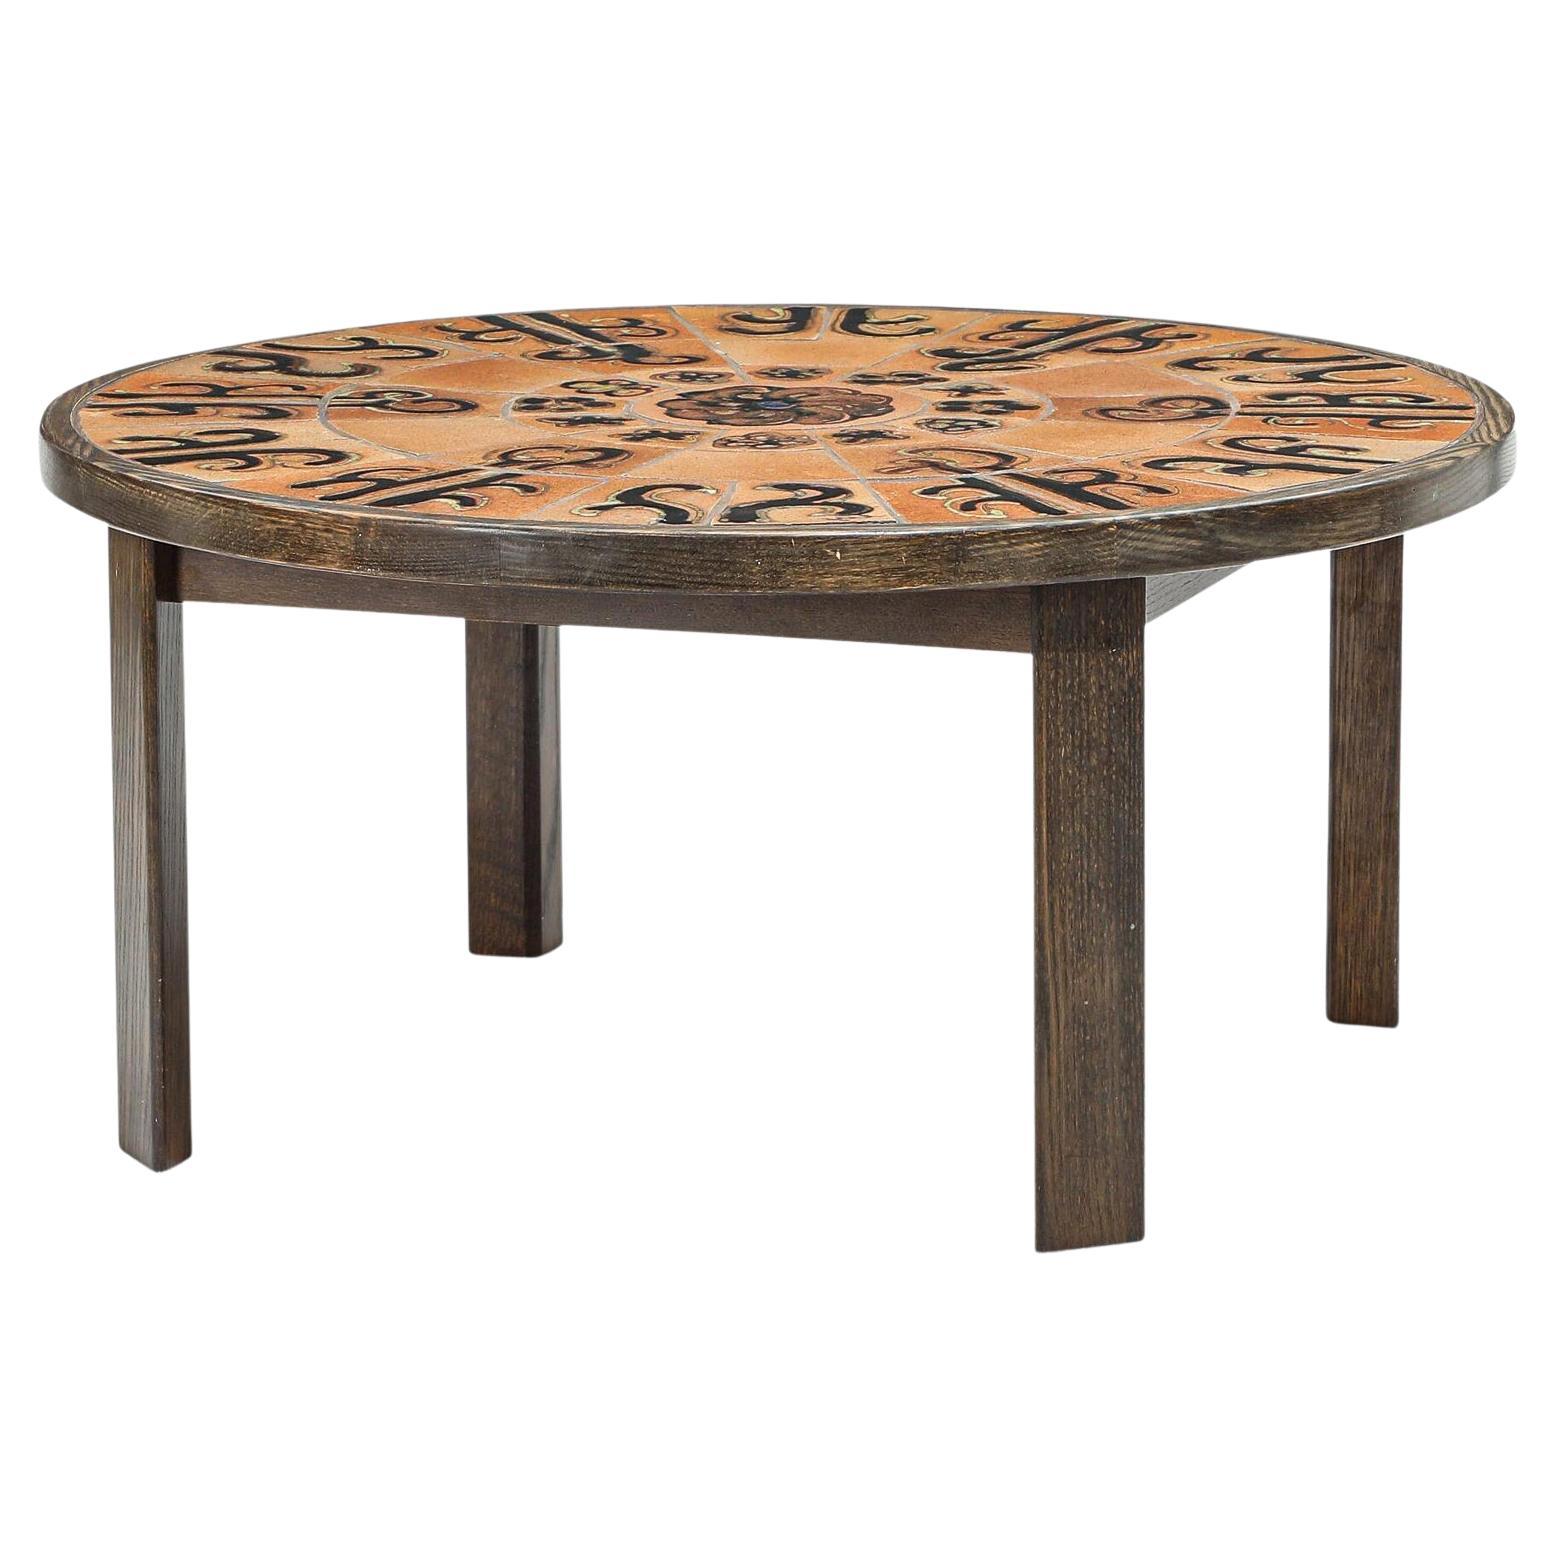 Round Stained Oak + Tile Coffee Table by Tue Poulsen